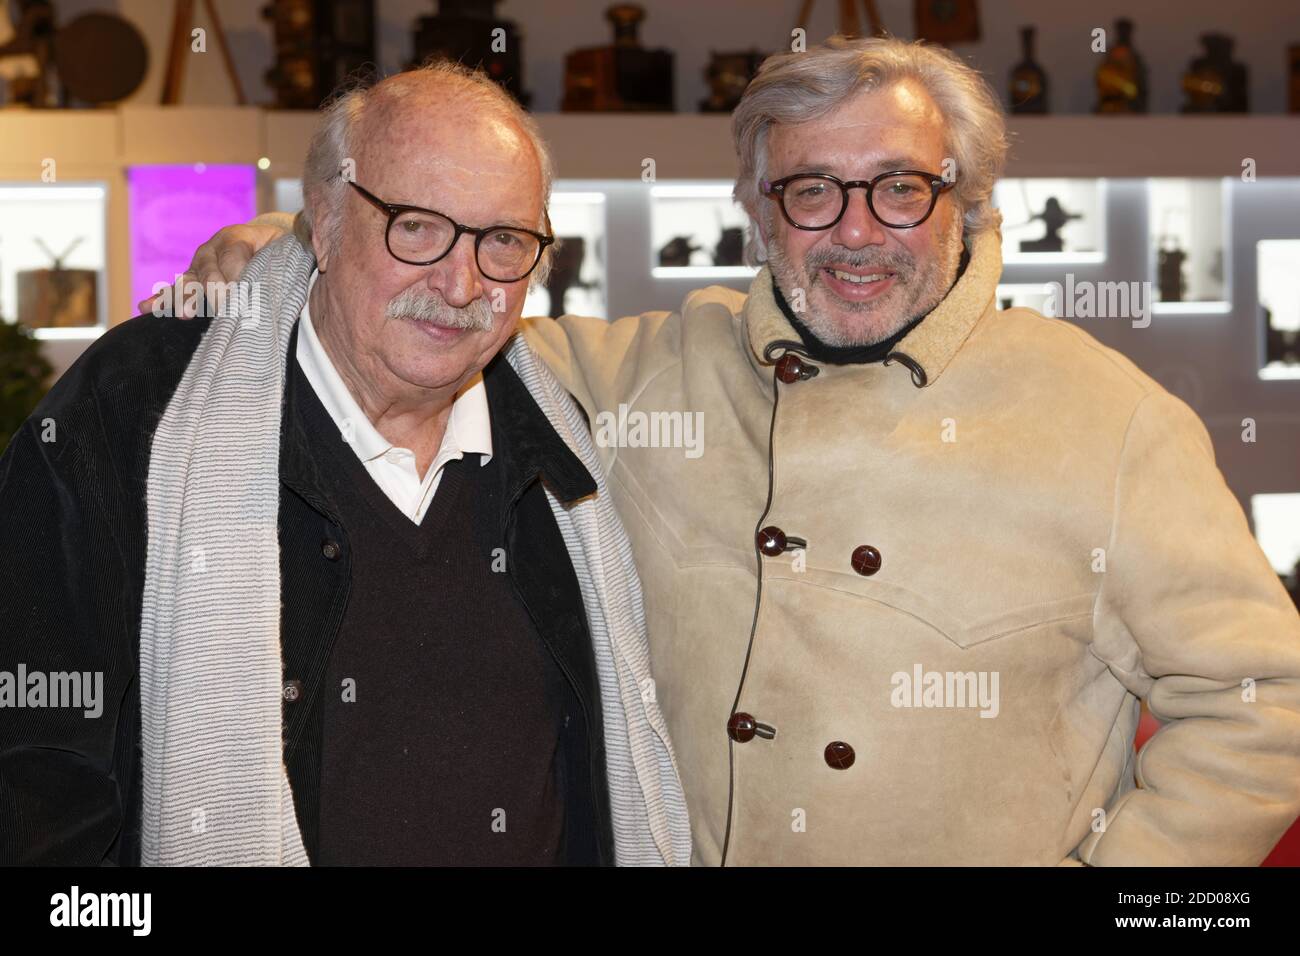 French film director Jean Becker (left) and his son, producer Louis Becker  attend the 'Le Collier Rouge' film premiere at cinema Majestic Compiegne,  on March 19, 2018 in Jaux, near Compiegne, France.